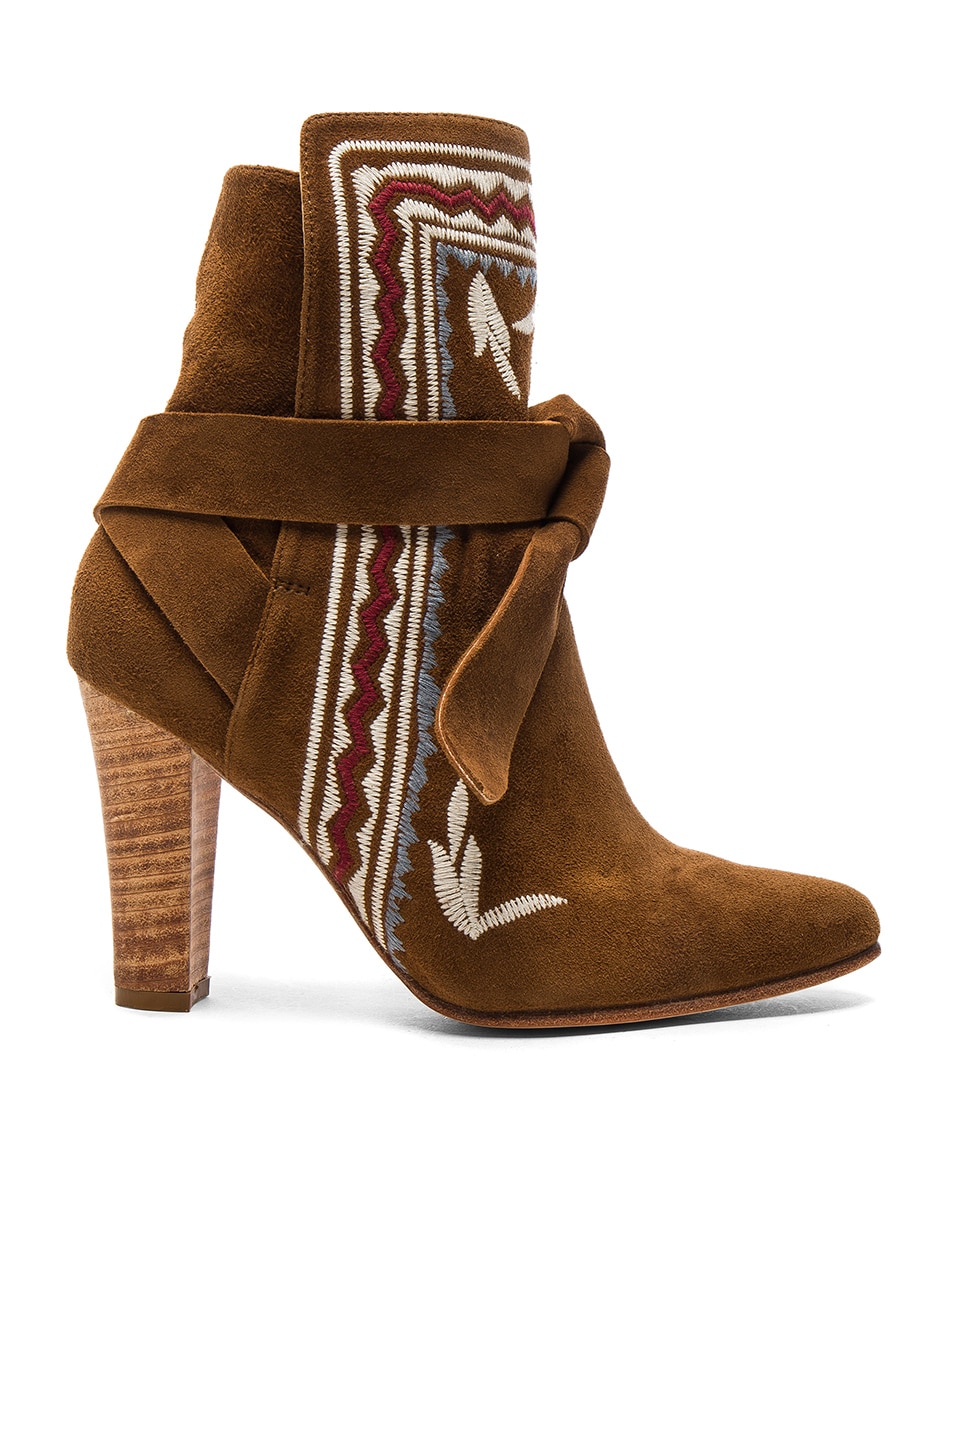 Image 1 of Ulla Johnson Embroidered Suede Aggie Booties in Saddle Suede